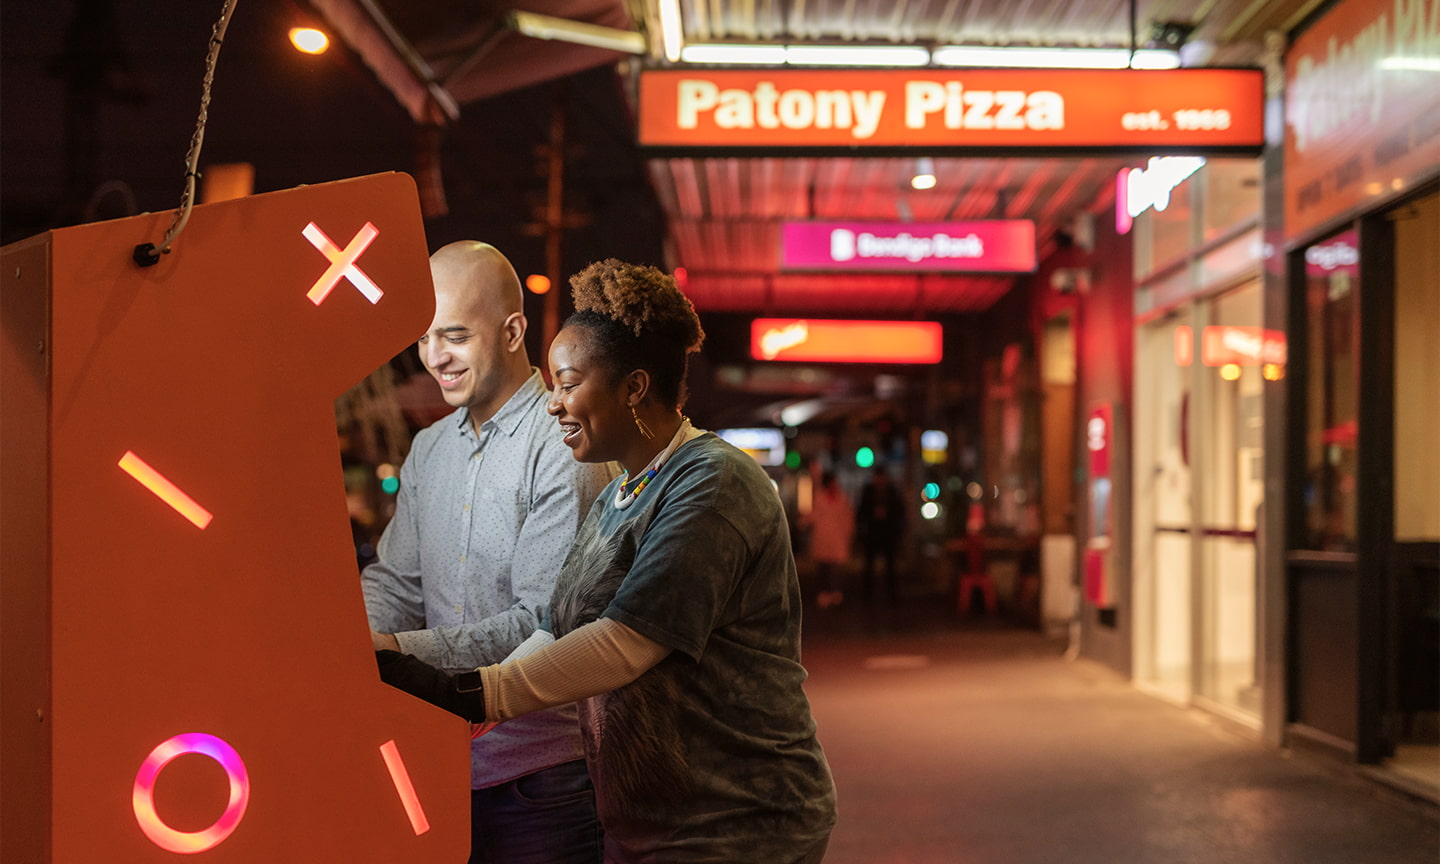 A couple plays on an arcade machine outside Patony Pizza in South Melbourne.